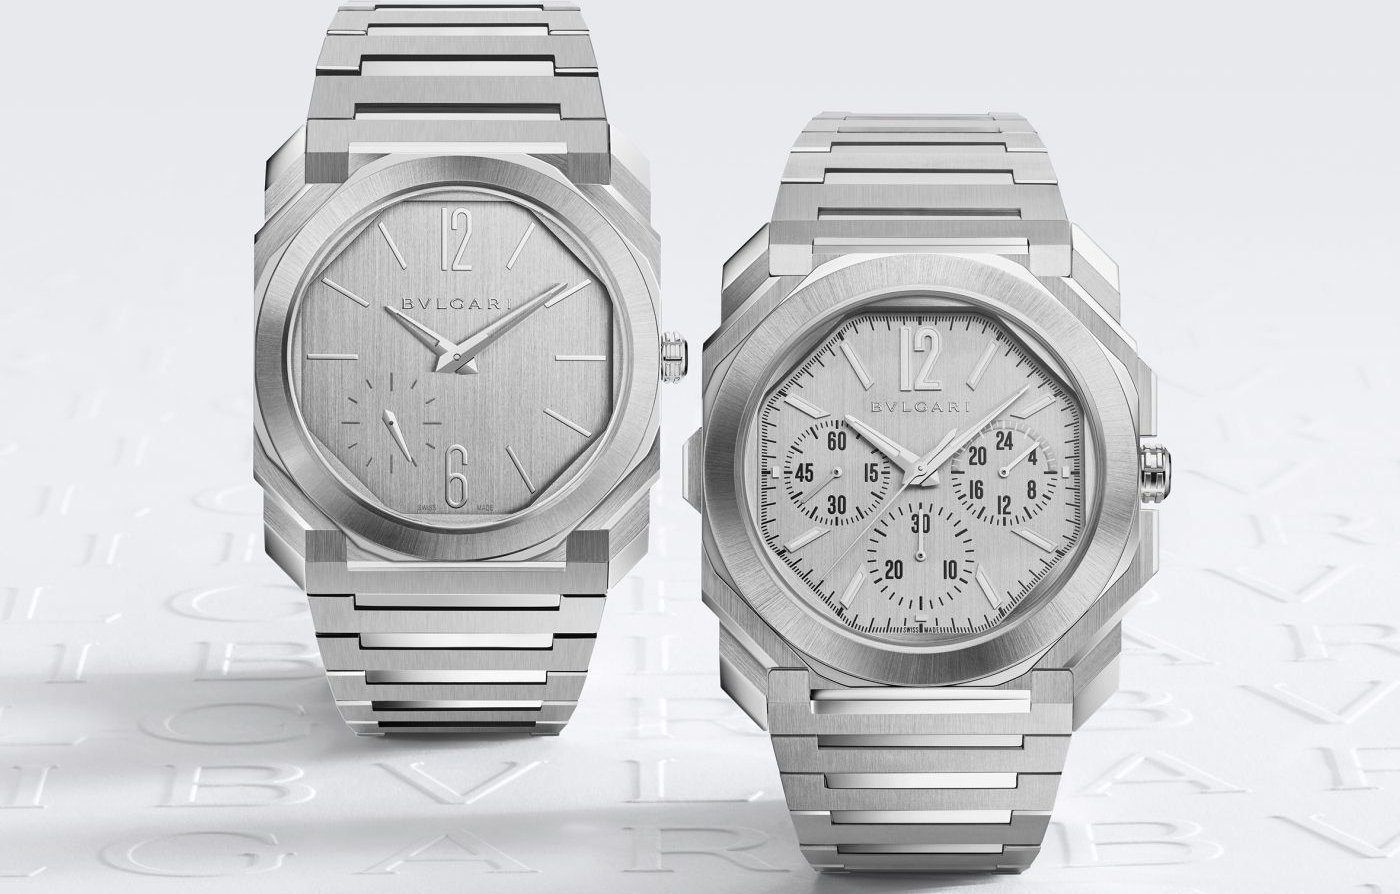 Bulgari releases new variations on the Octo Finissimo